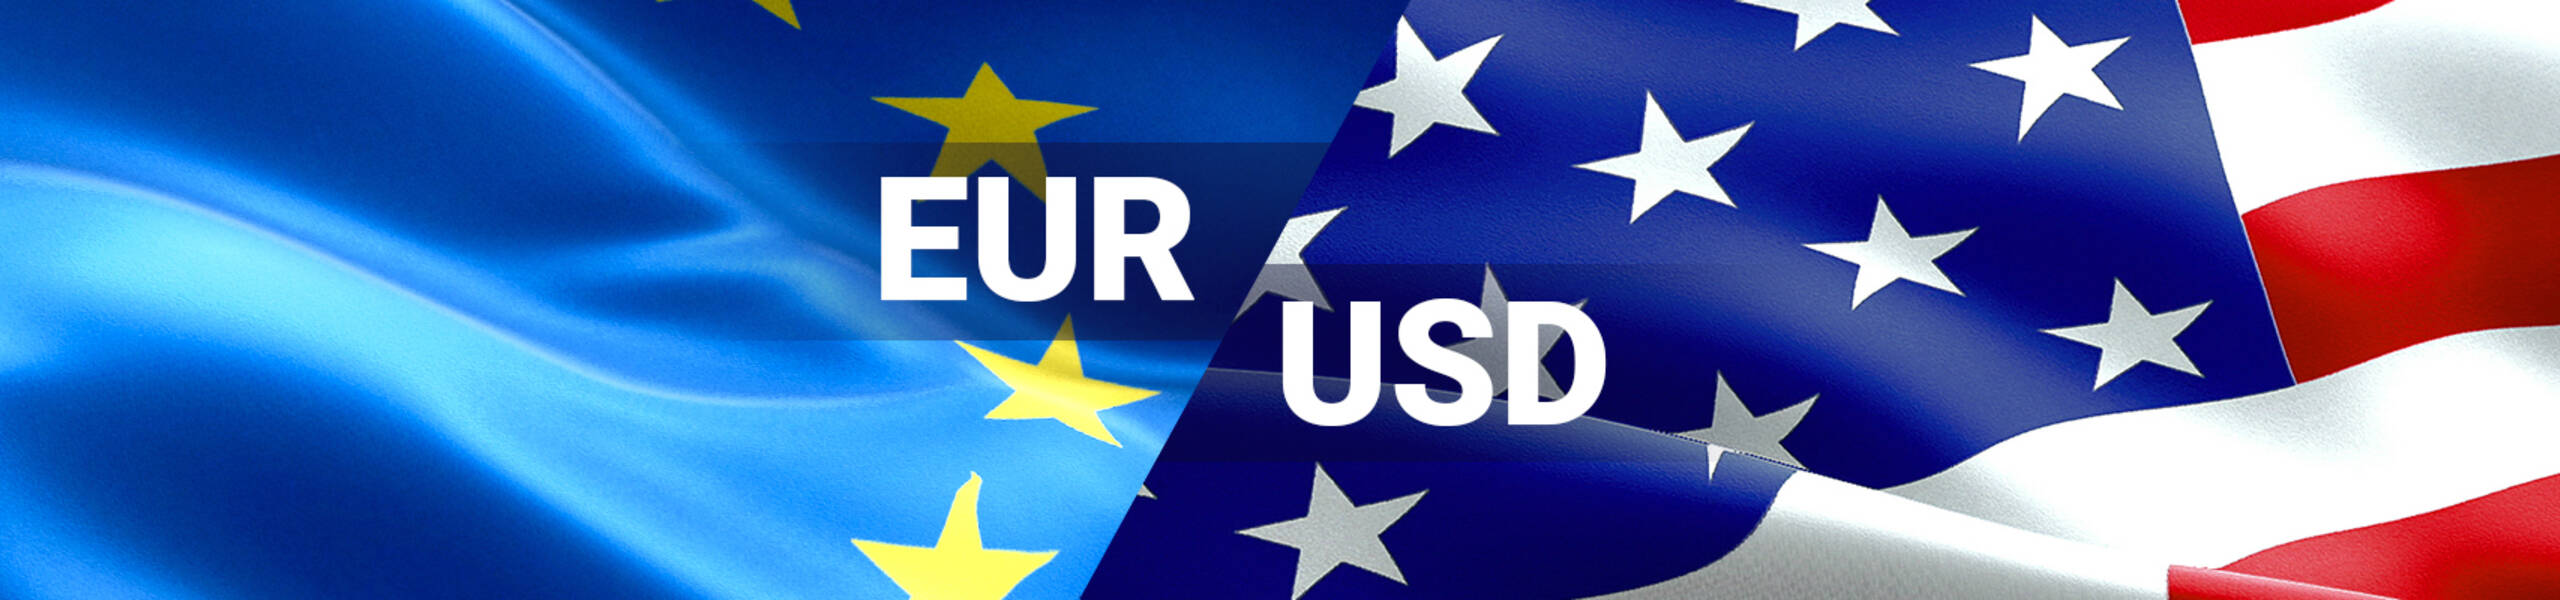 EUR/USD: euro testing Cloud’s support